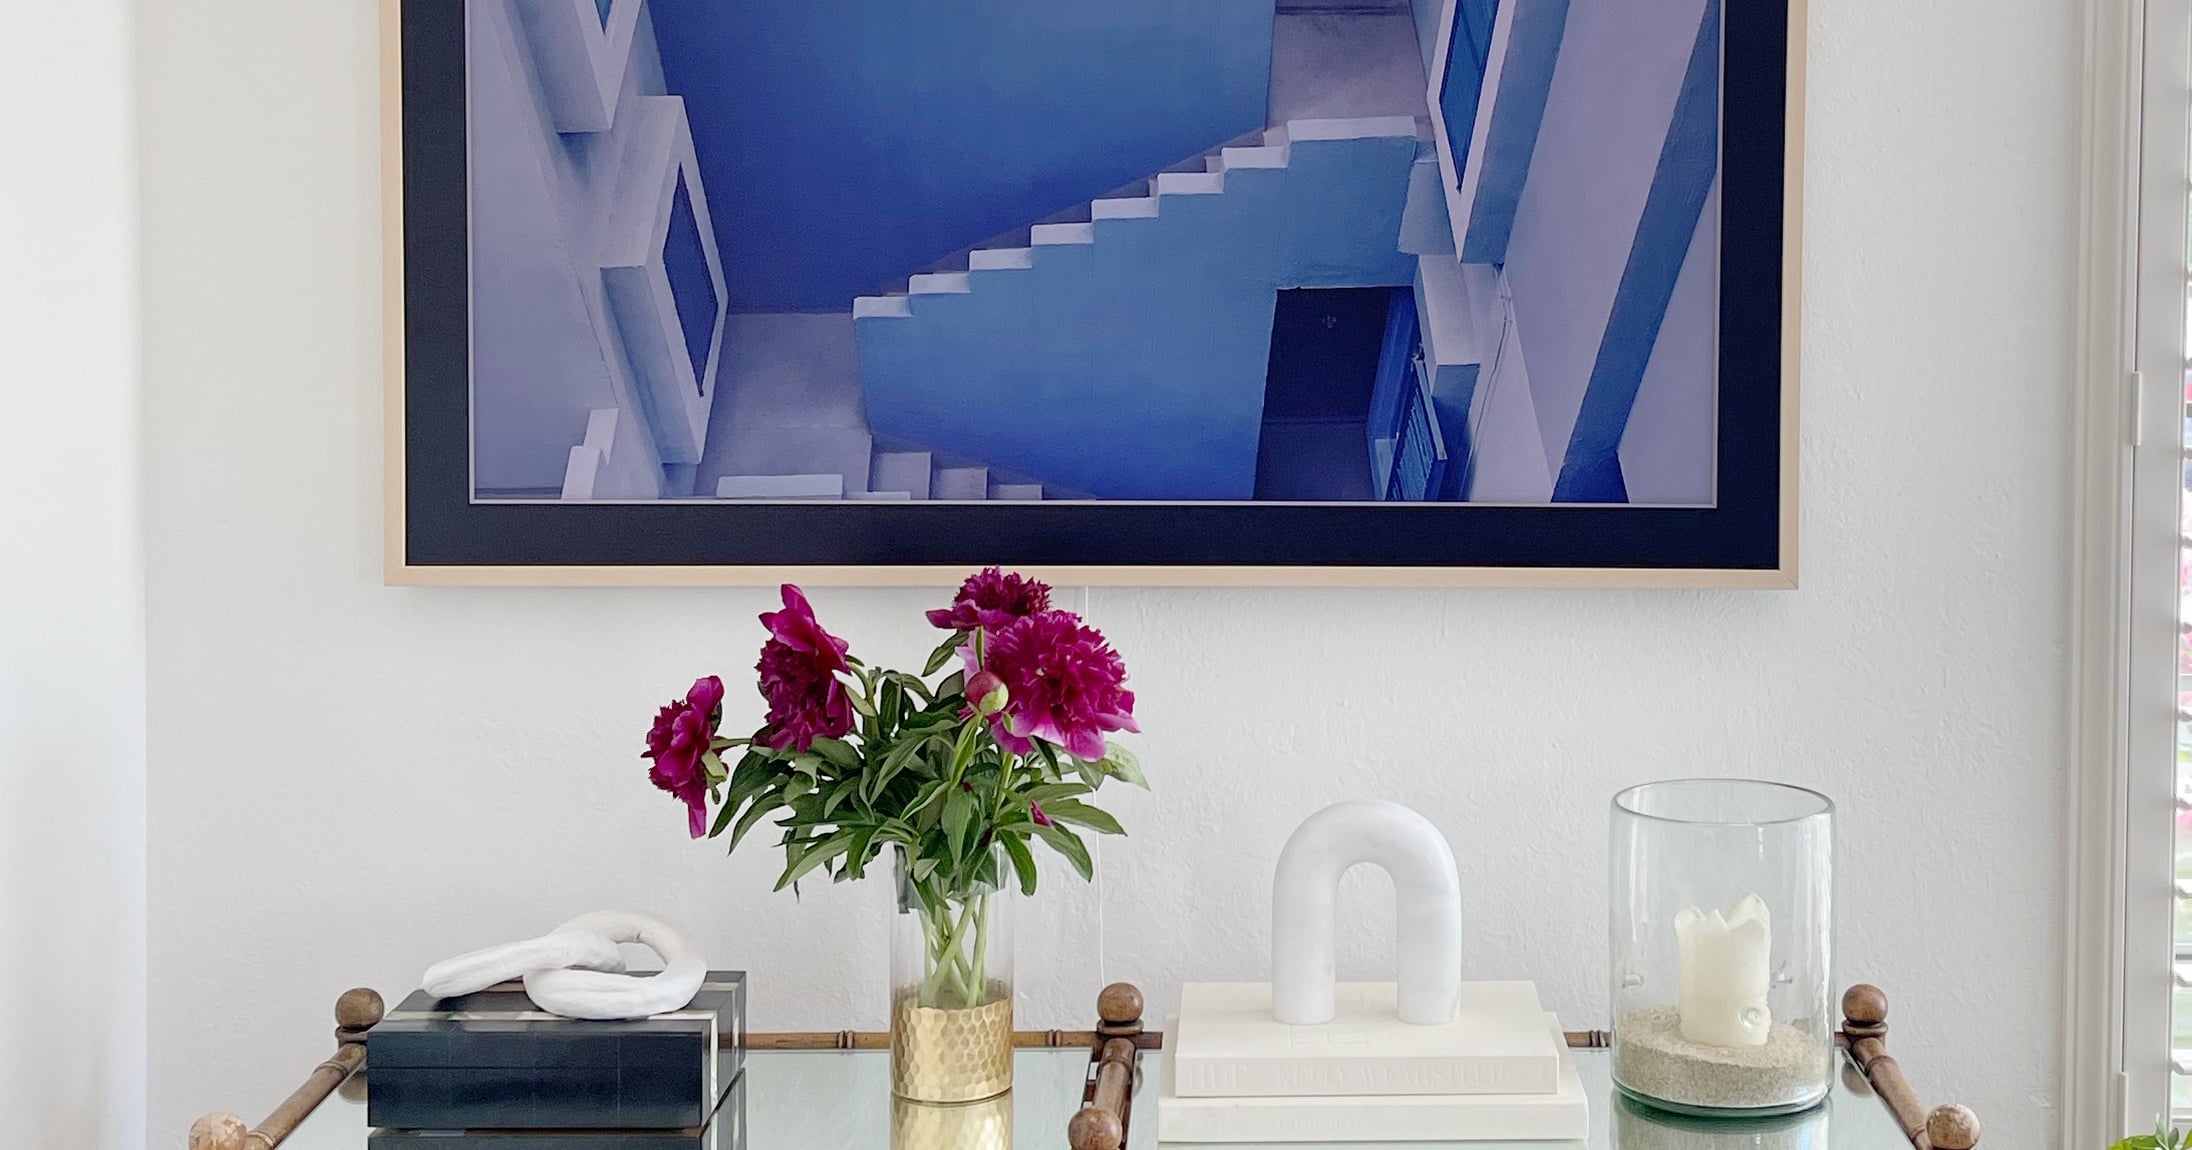 The Frame TV Is My Favorite Home Upgrade — and It’s Now ,000 Off